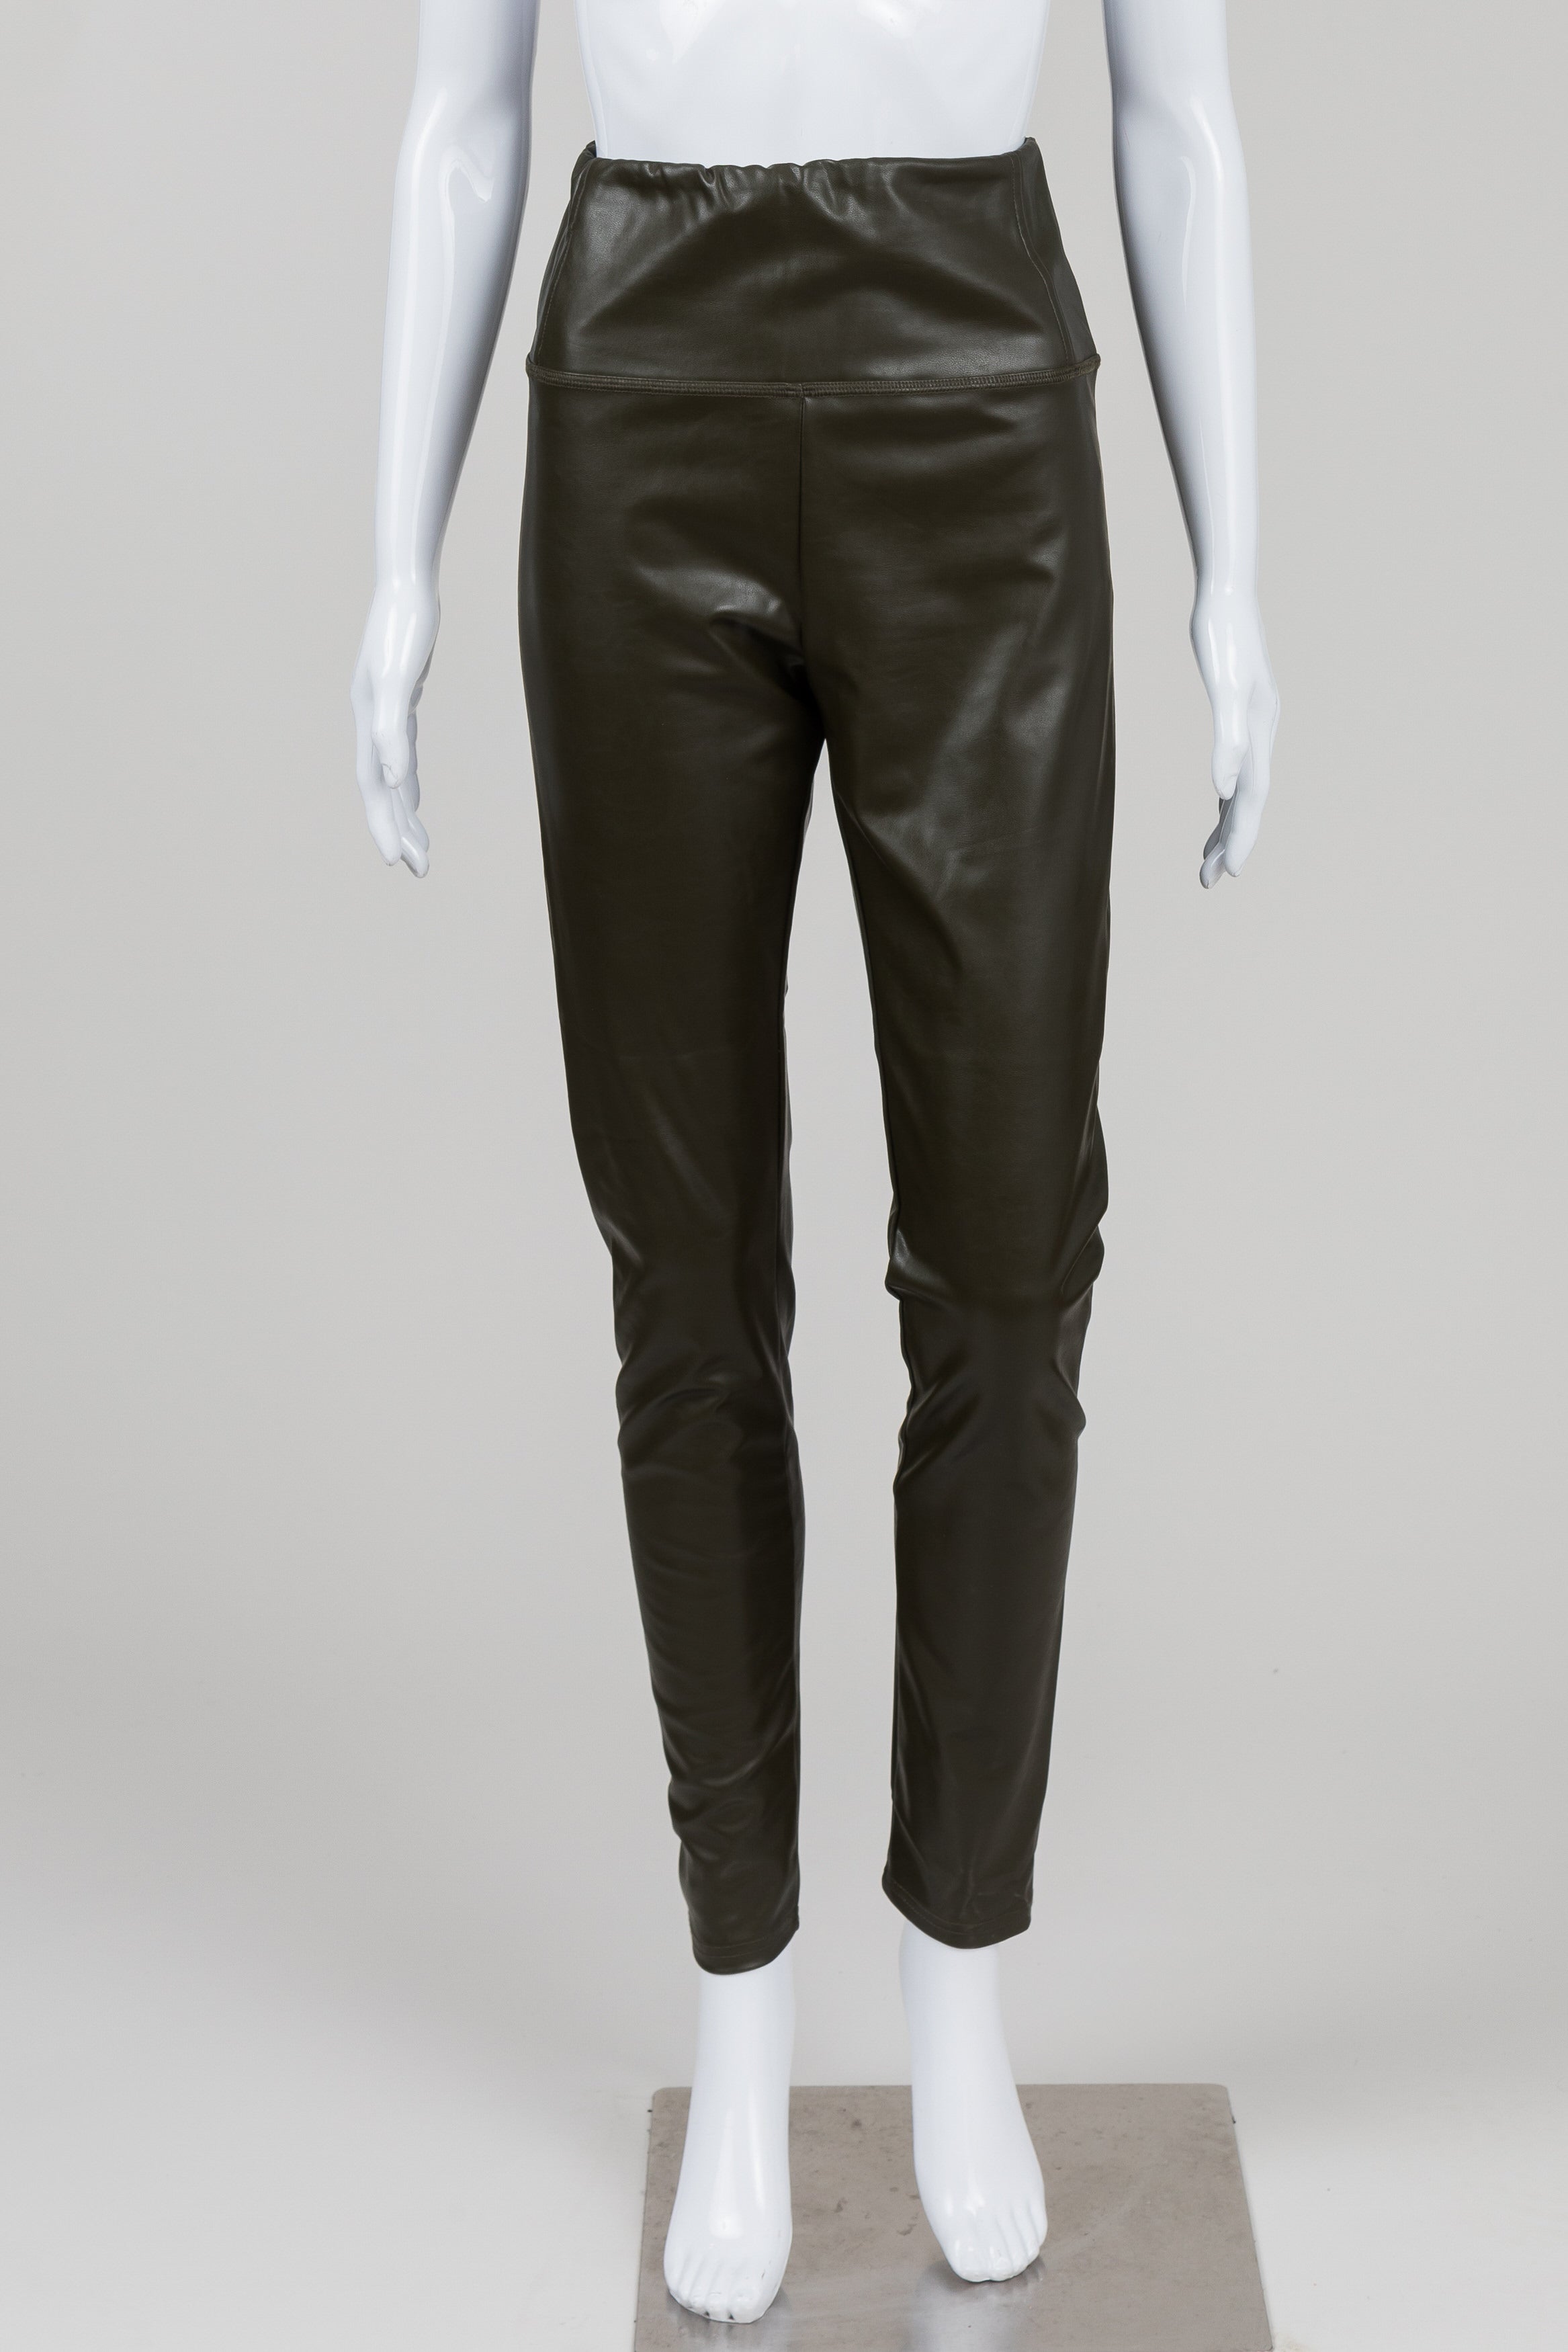 Saks Fifth Avenue Olive Faux Leather Skinny Pants (L)